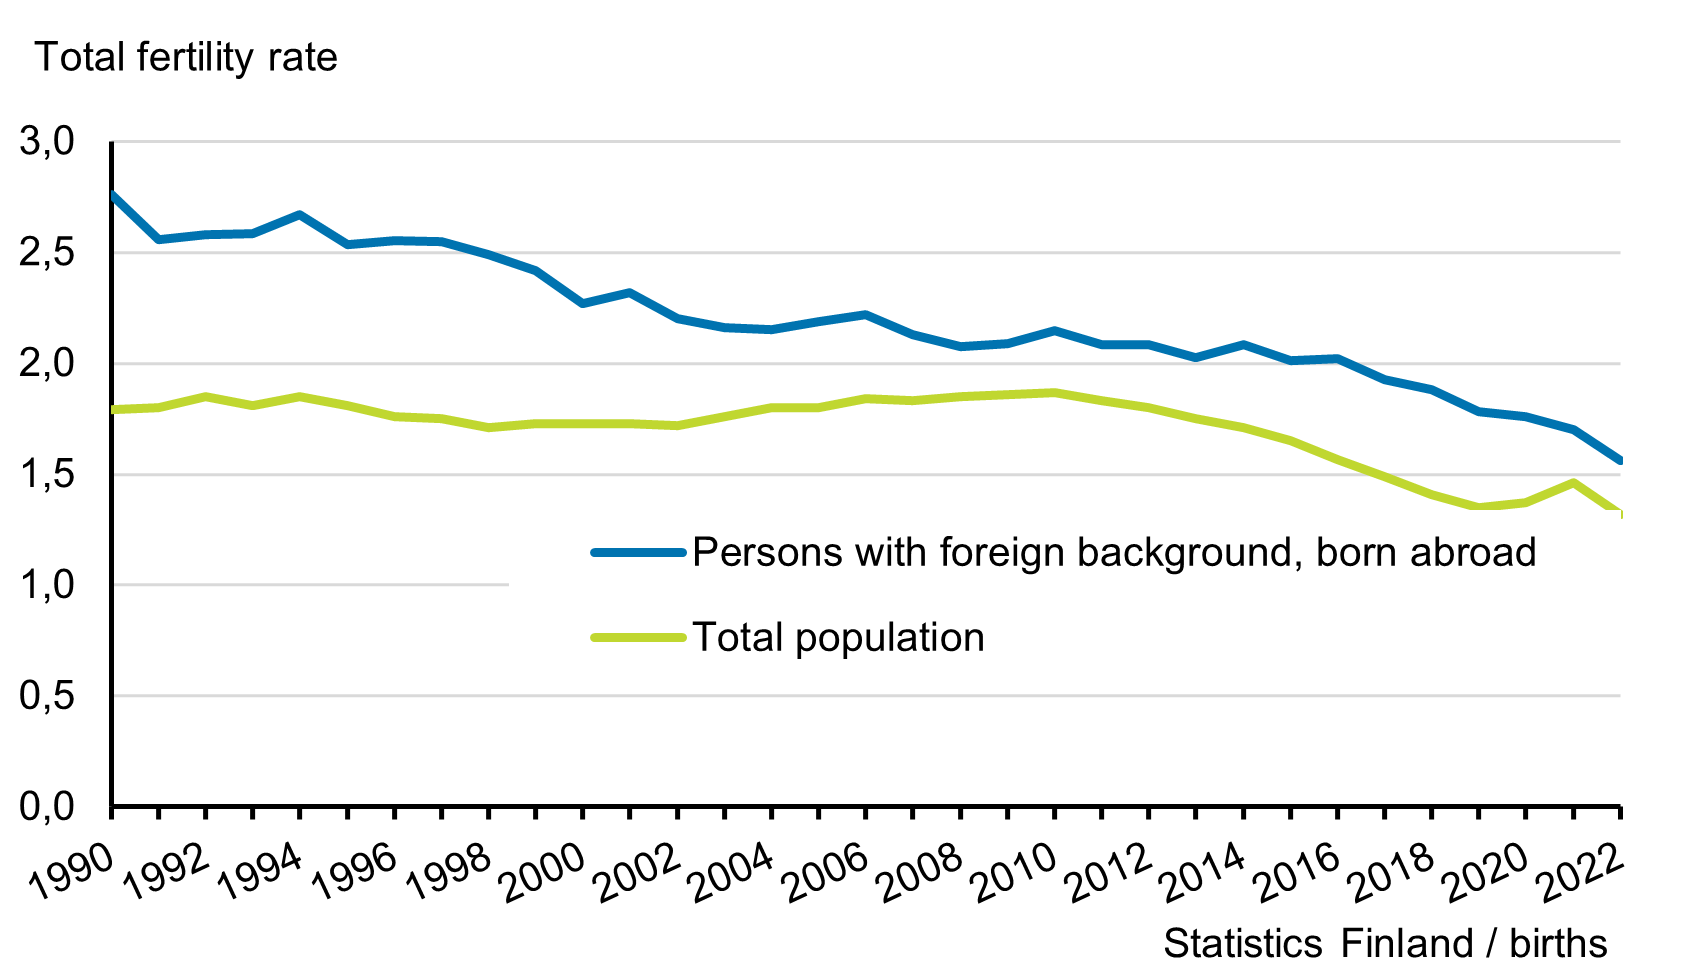 total fertility rate in 1990 to 2018 by background